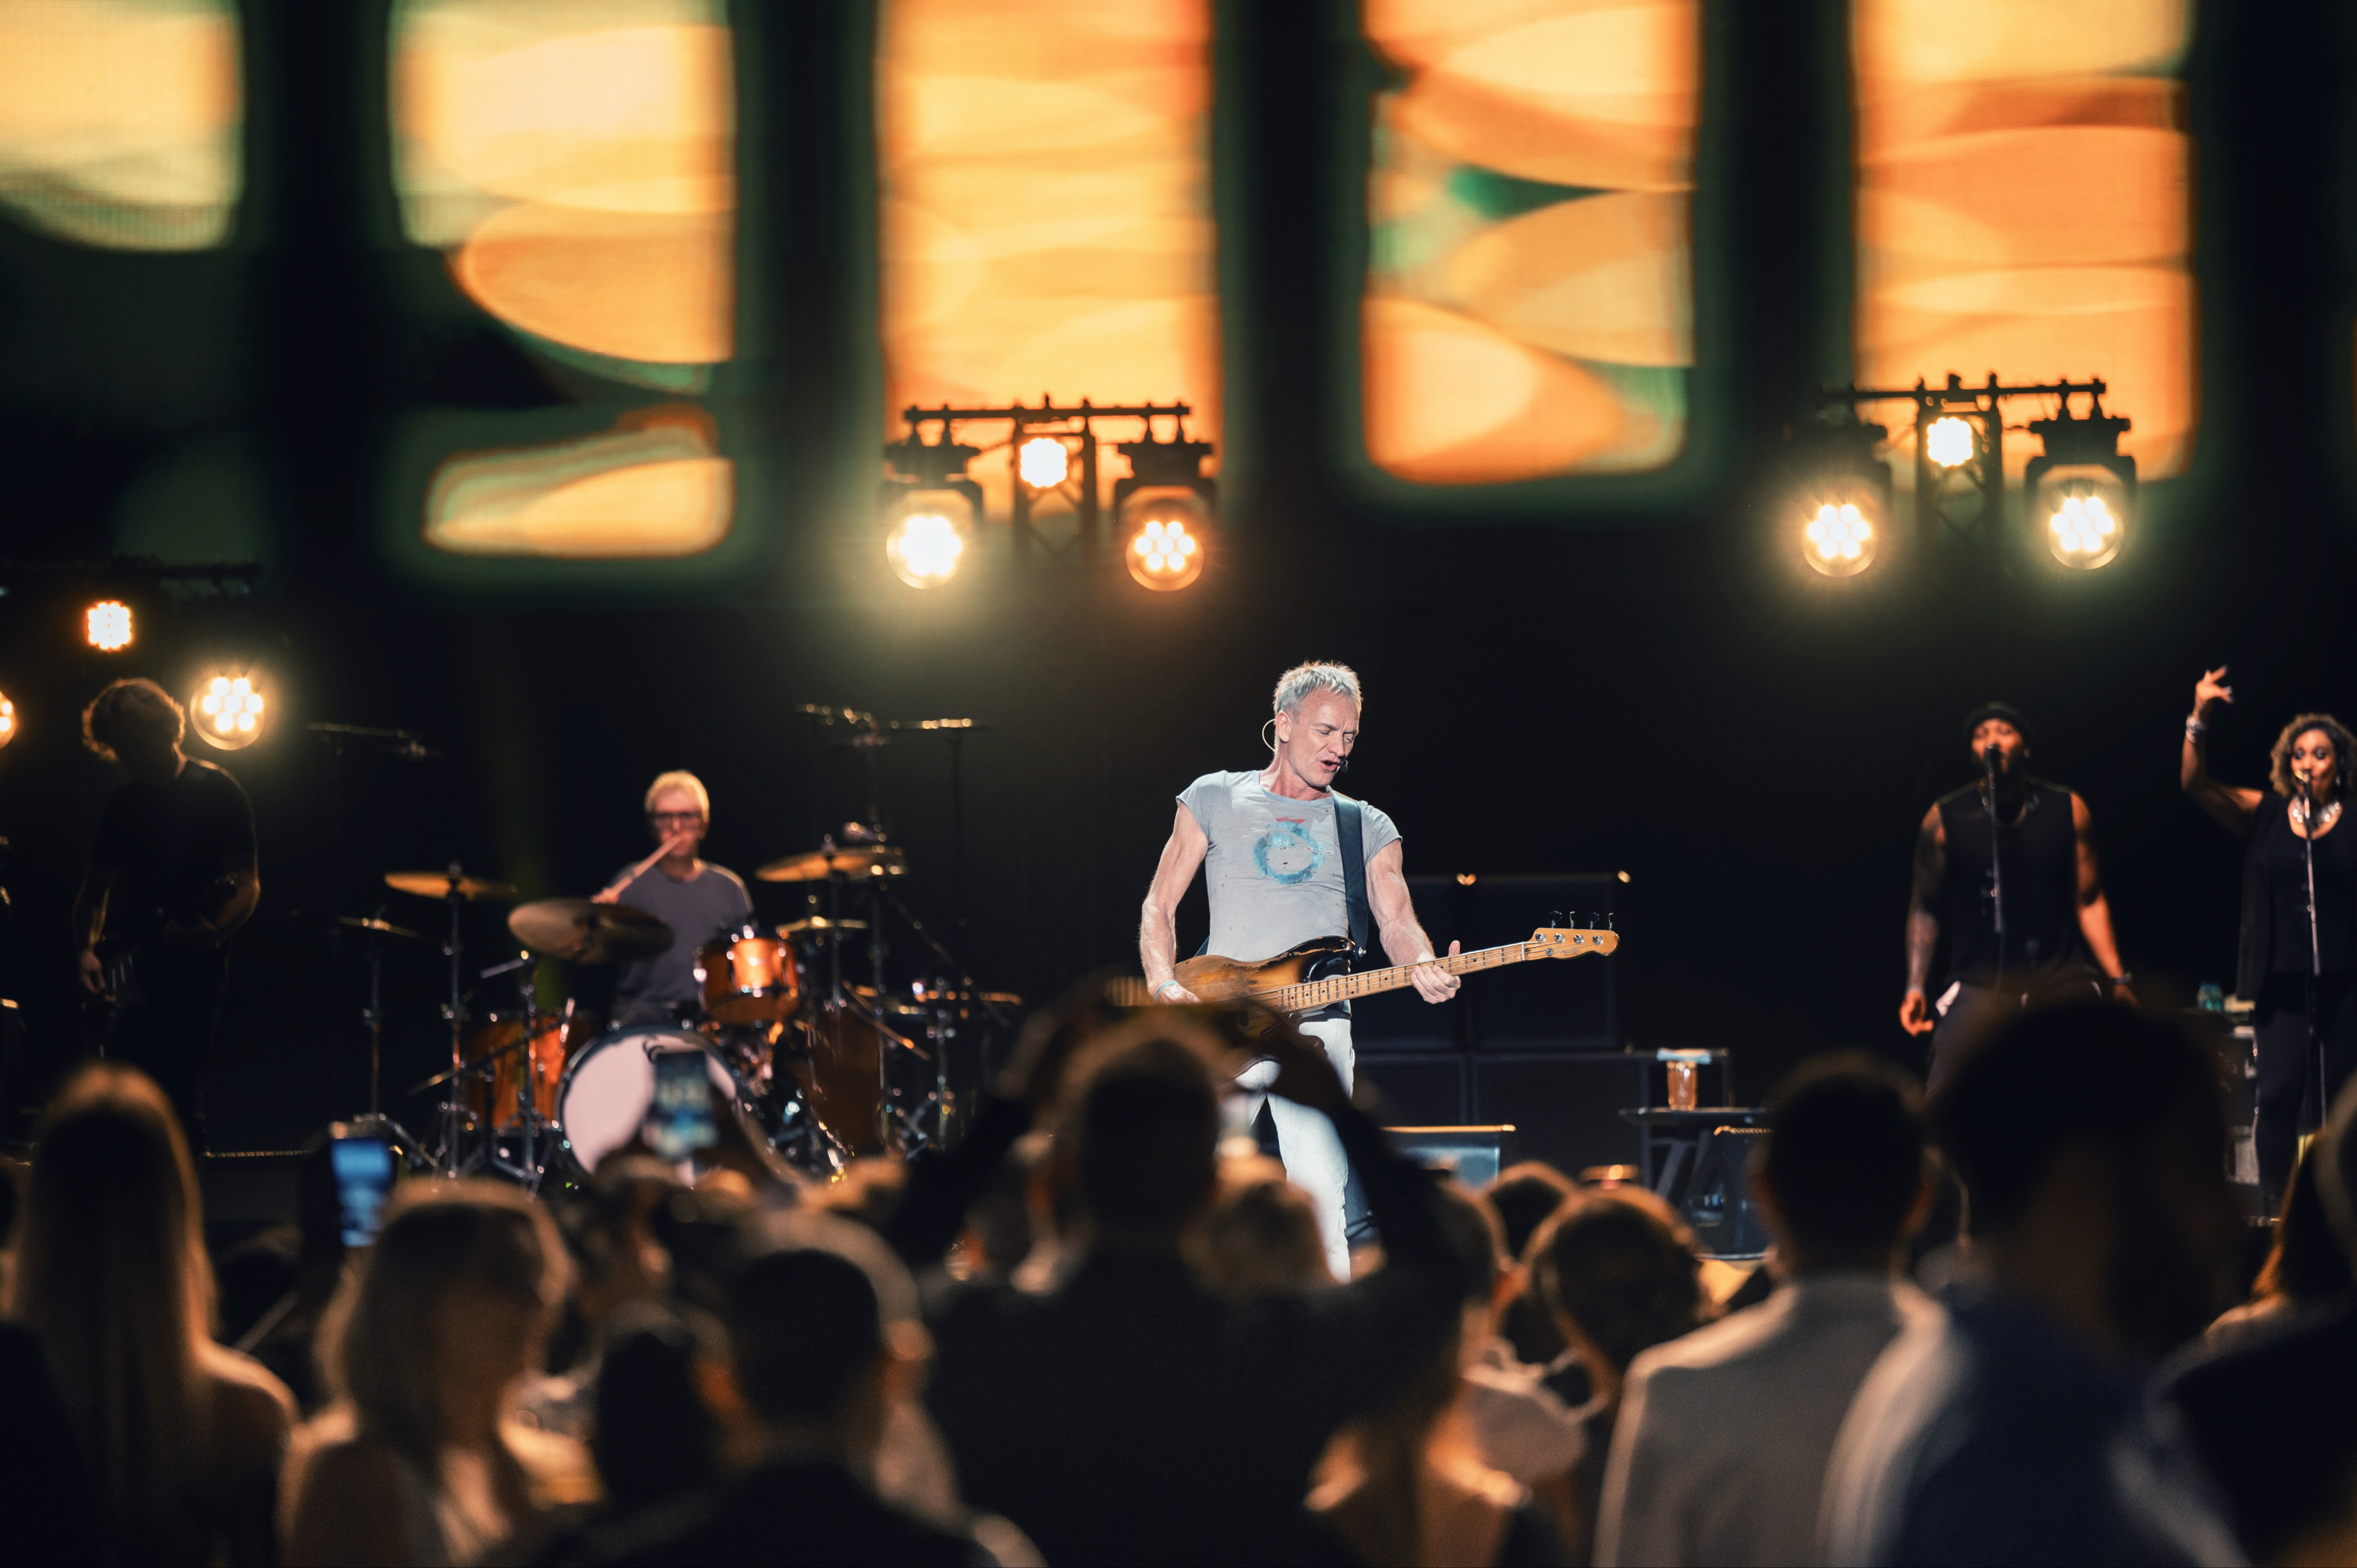 Sting performed for an hour at Atlantis The Palm hotel